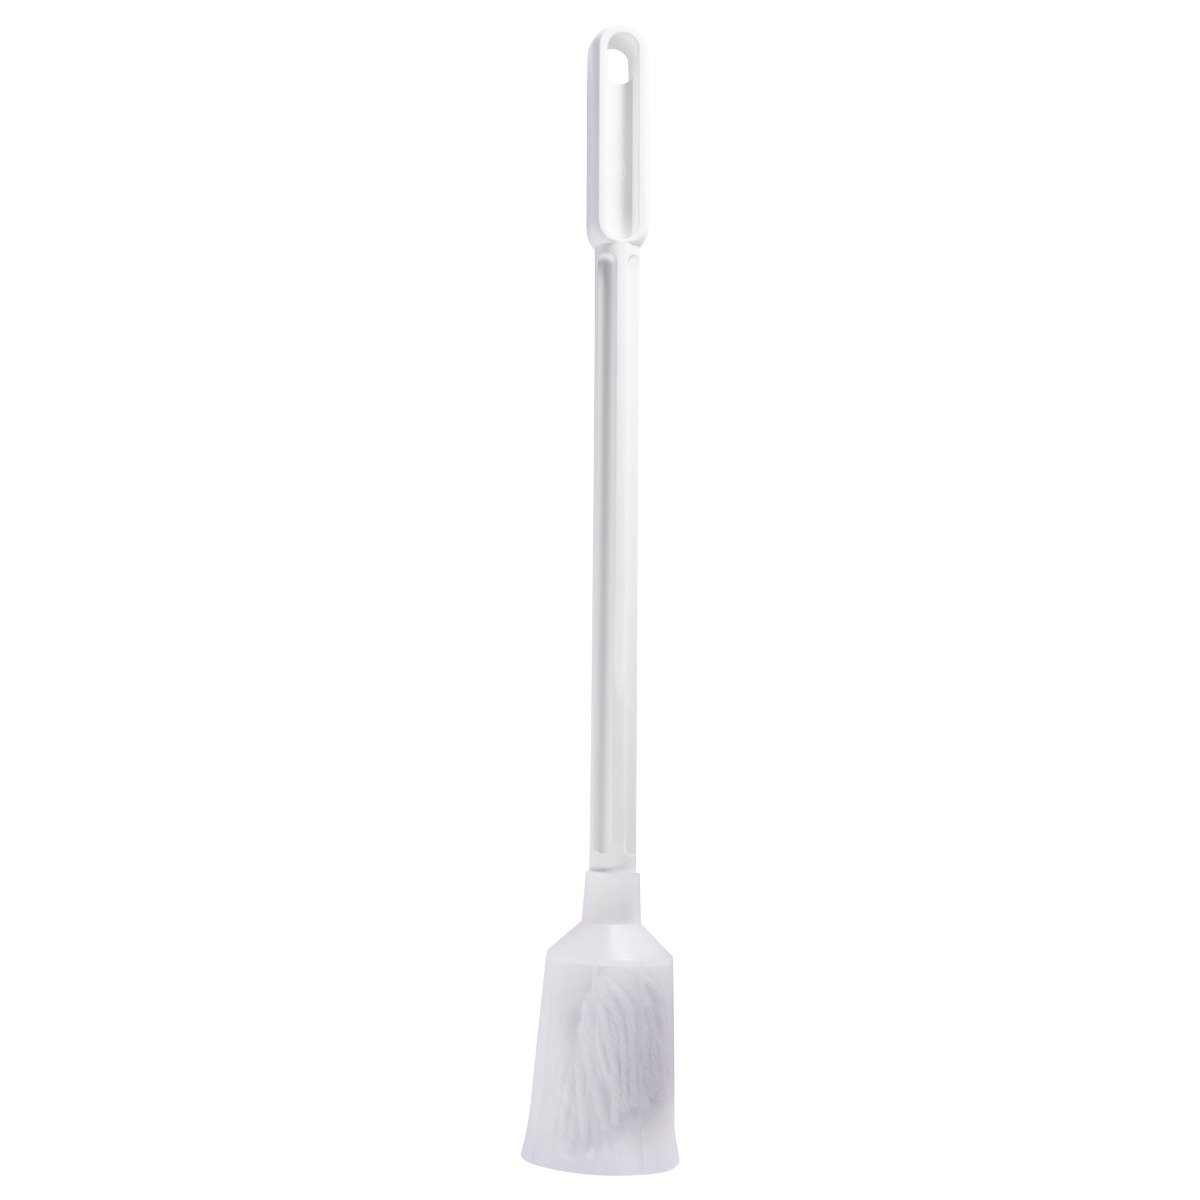 Toilet Brush and Holder, Automatic Toilet Bowl Brushes for